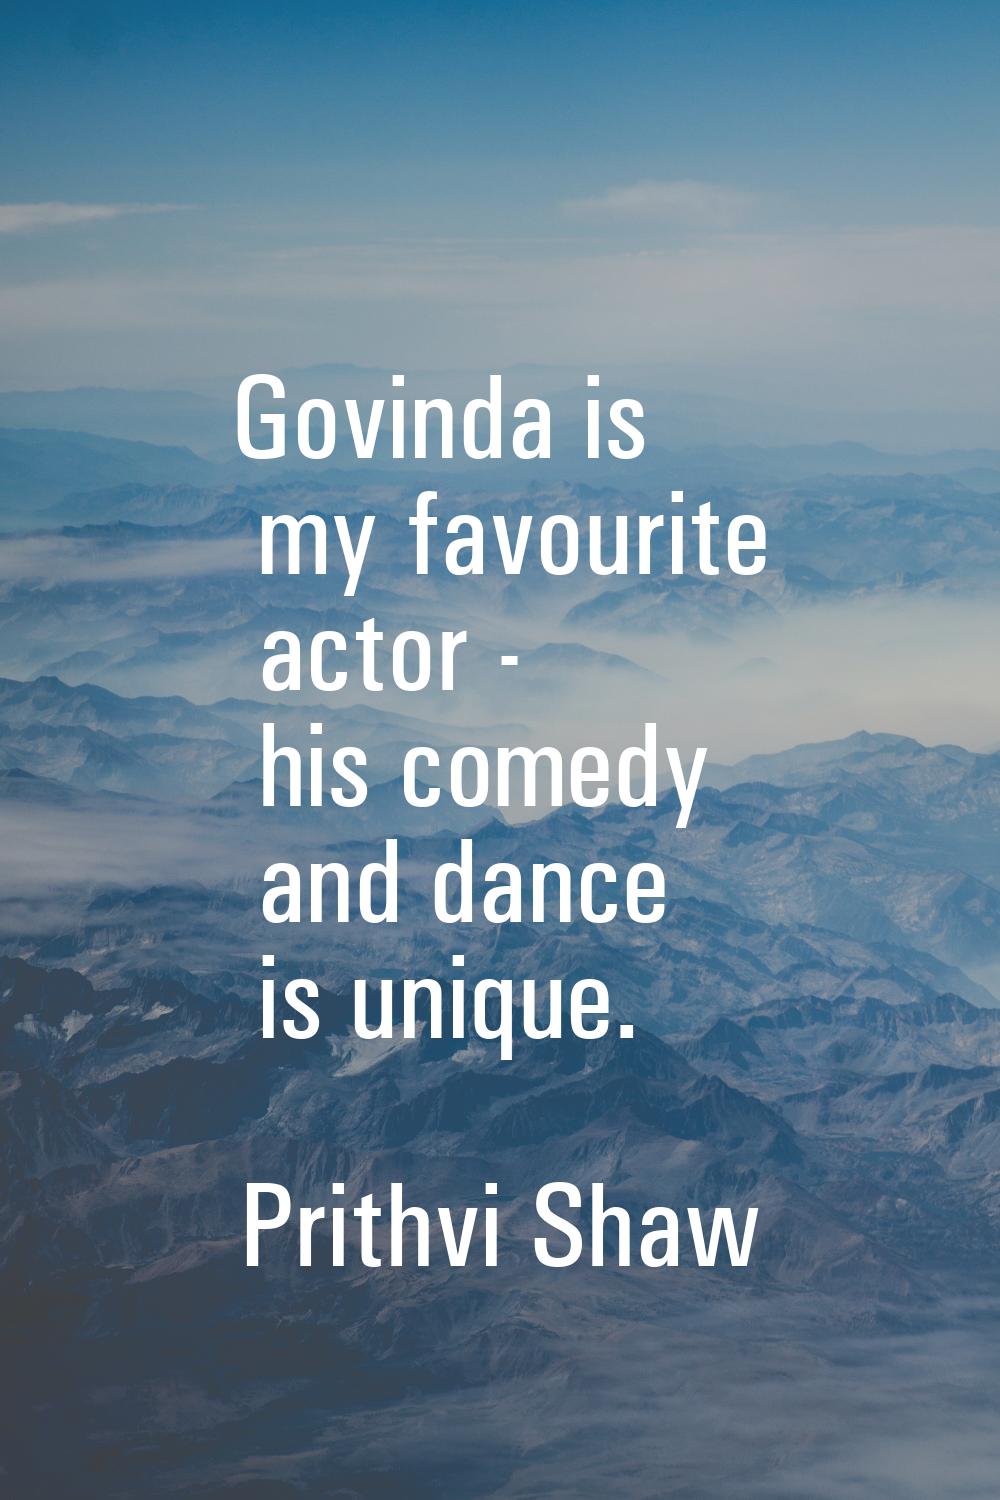 Govinda is my favourite actor - his comedy and dance is unique.